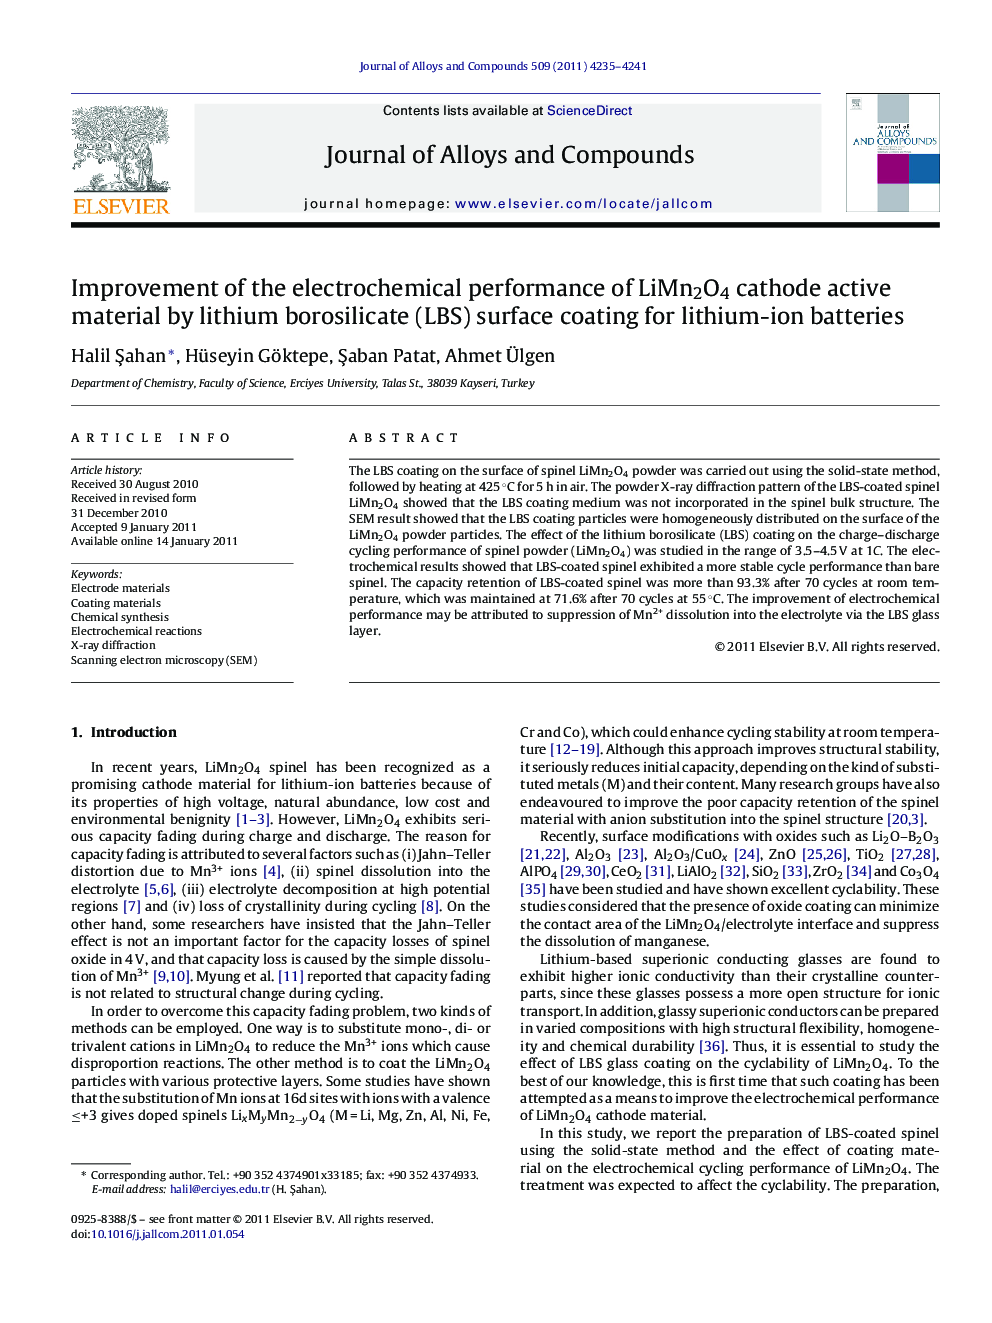 Improvement of the electrochemical performance of LiMn2O4 cathode active material by lithium borosilicate (LBS) surface coating for lithium-ion batteries